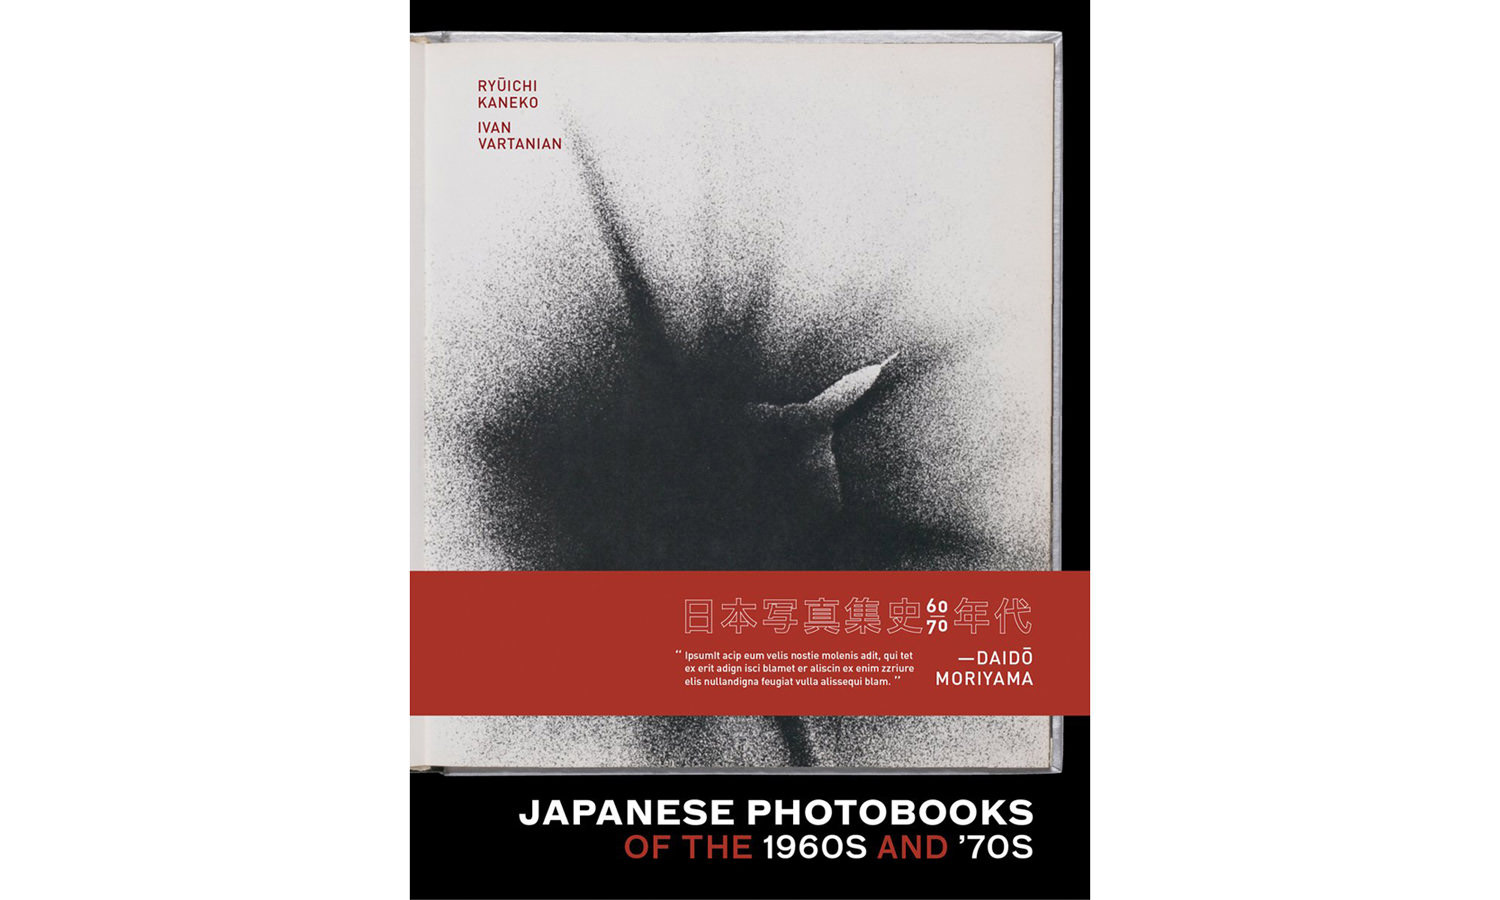 JAPANESE PHOTOBOOKS OF THE 1960S AND '70S